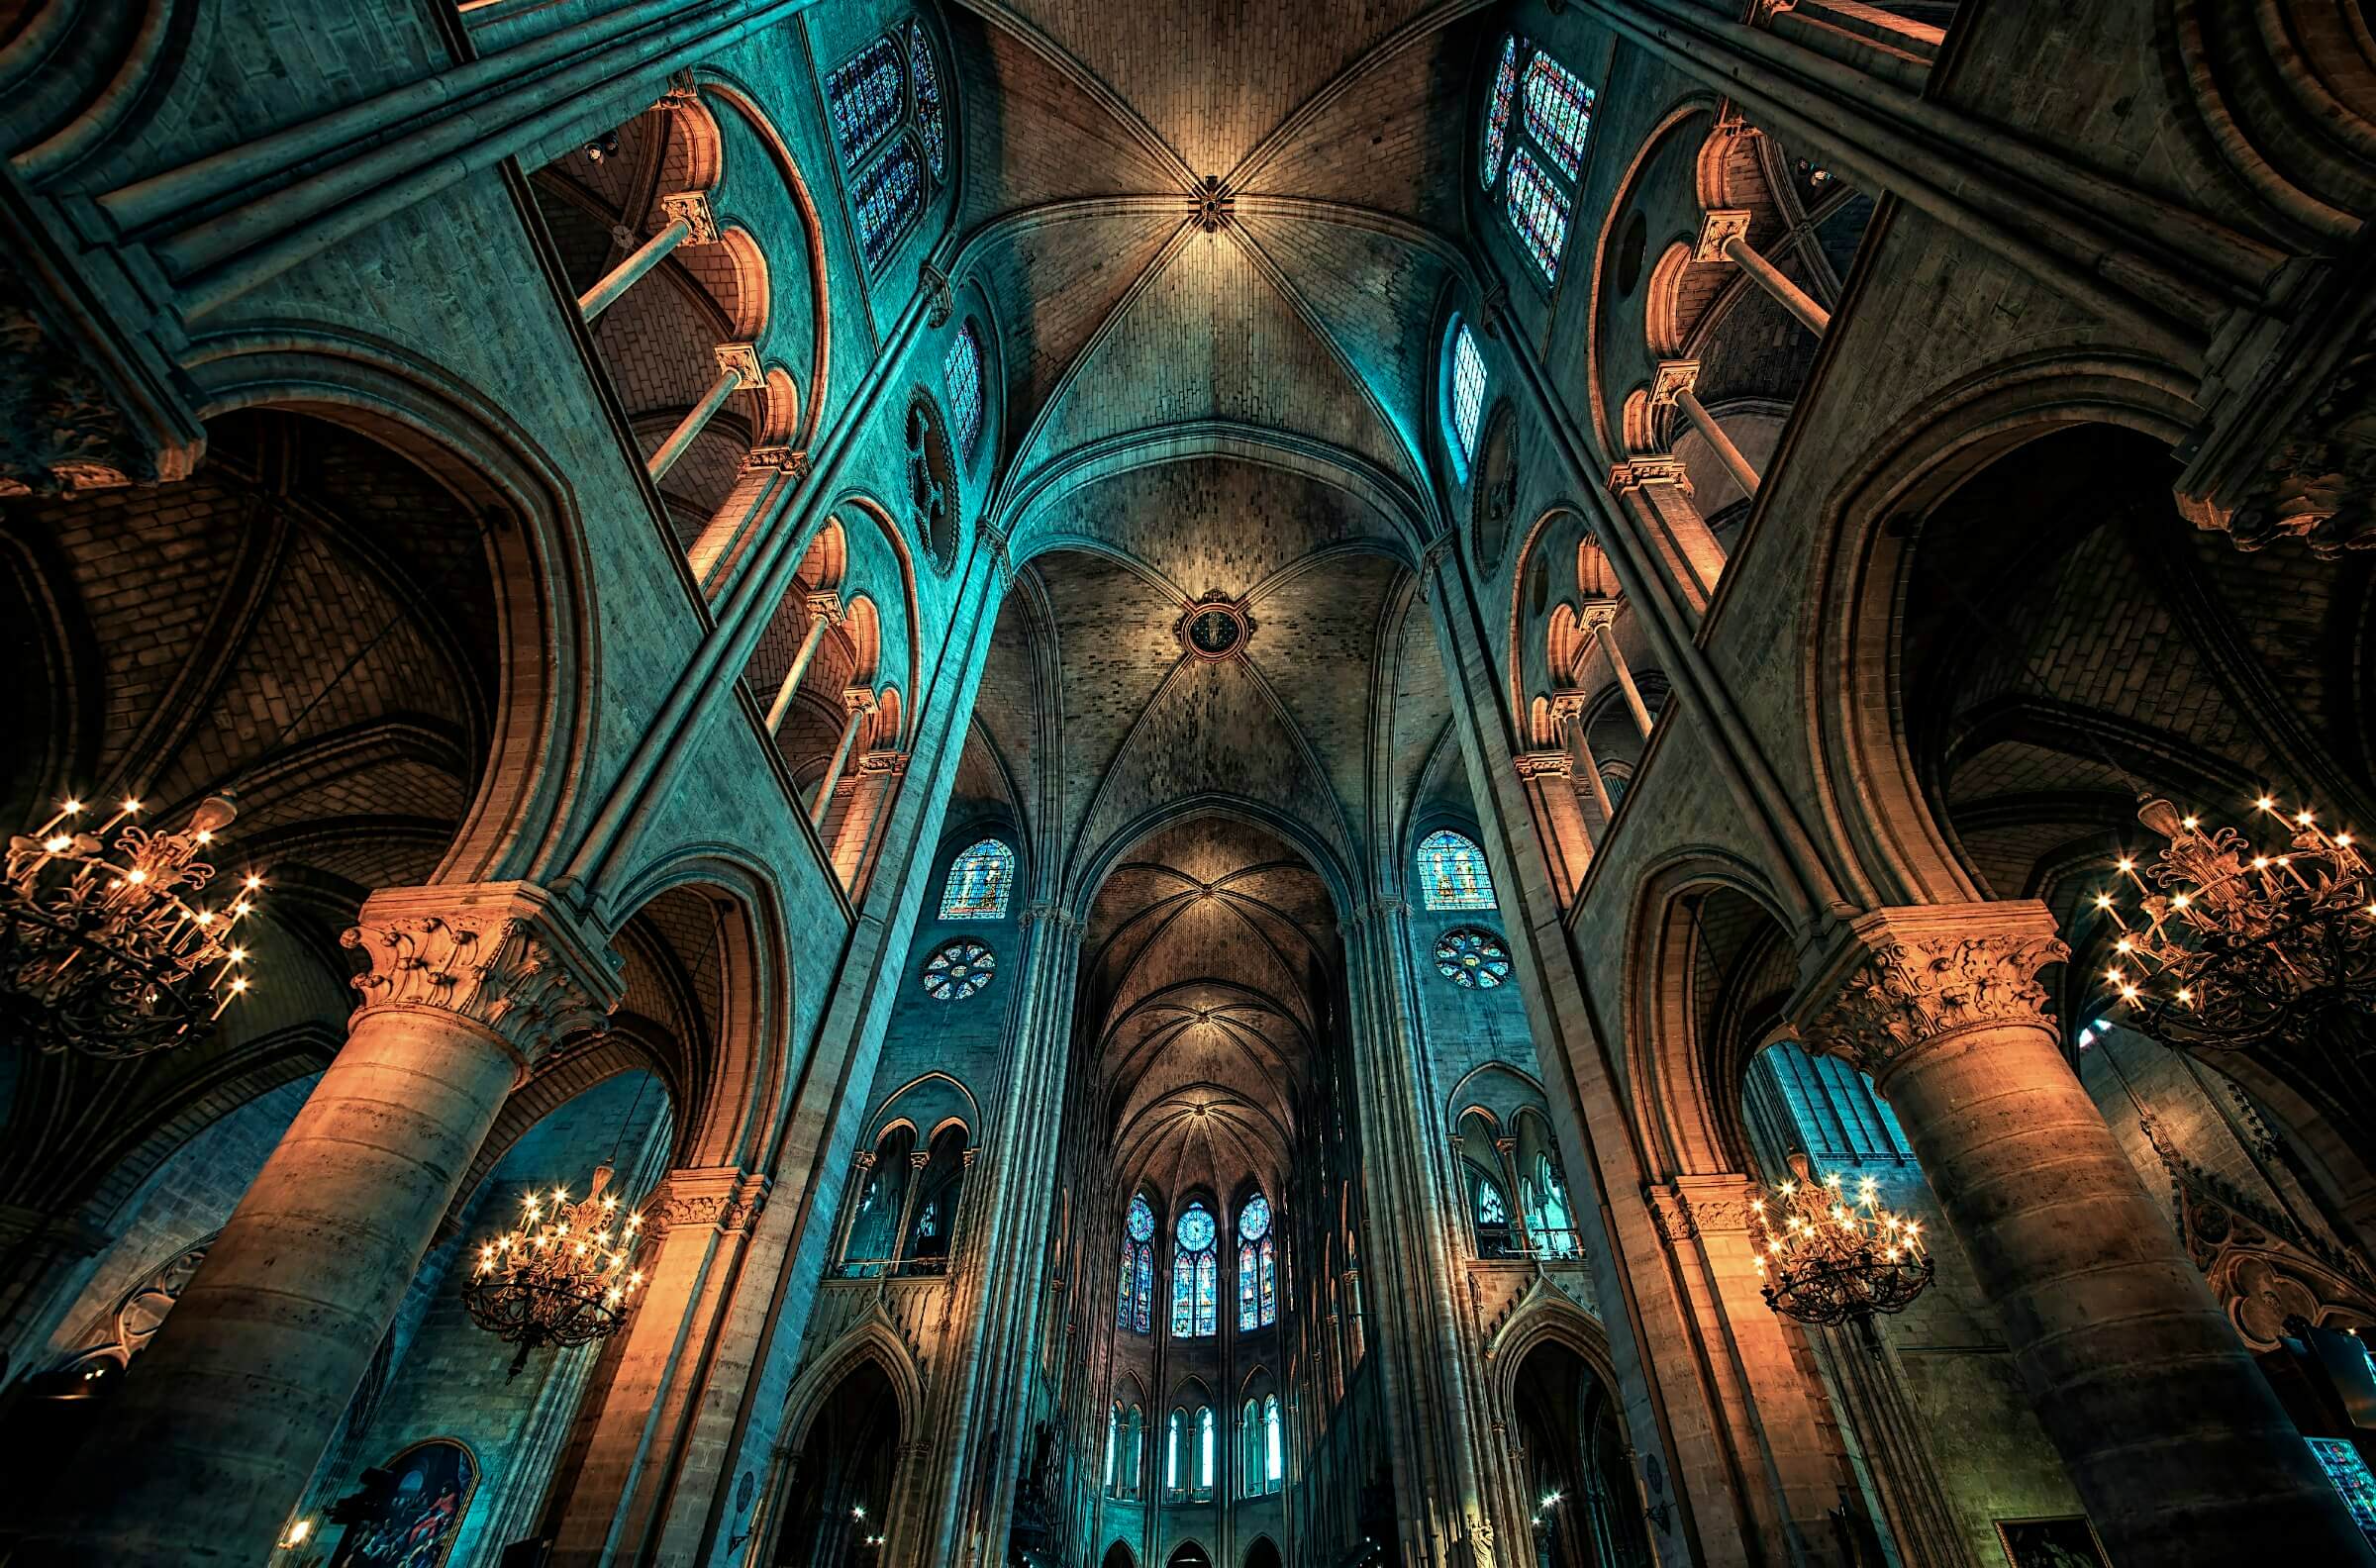 The restoration of Notre Dame is on hold due to the coronavirus